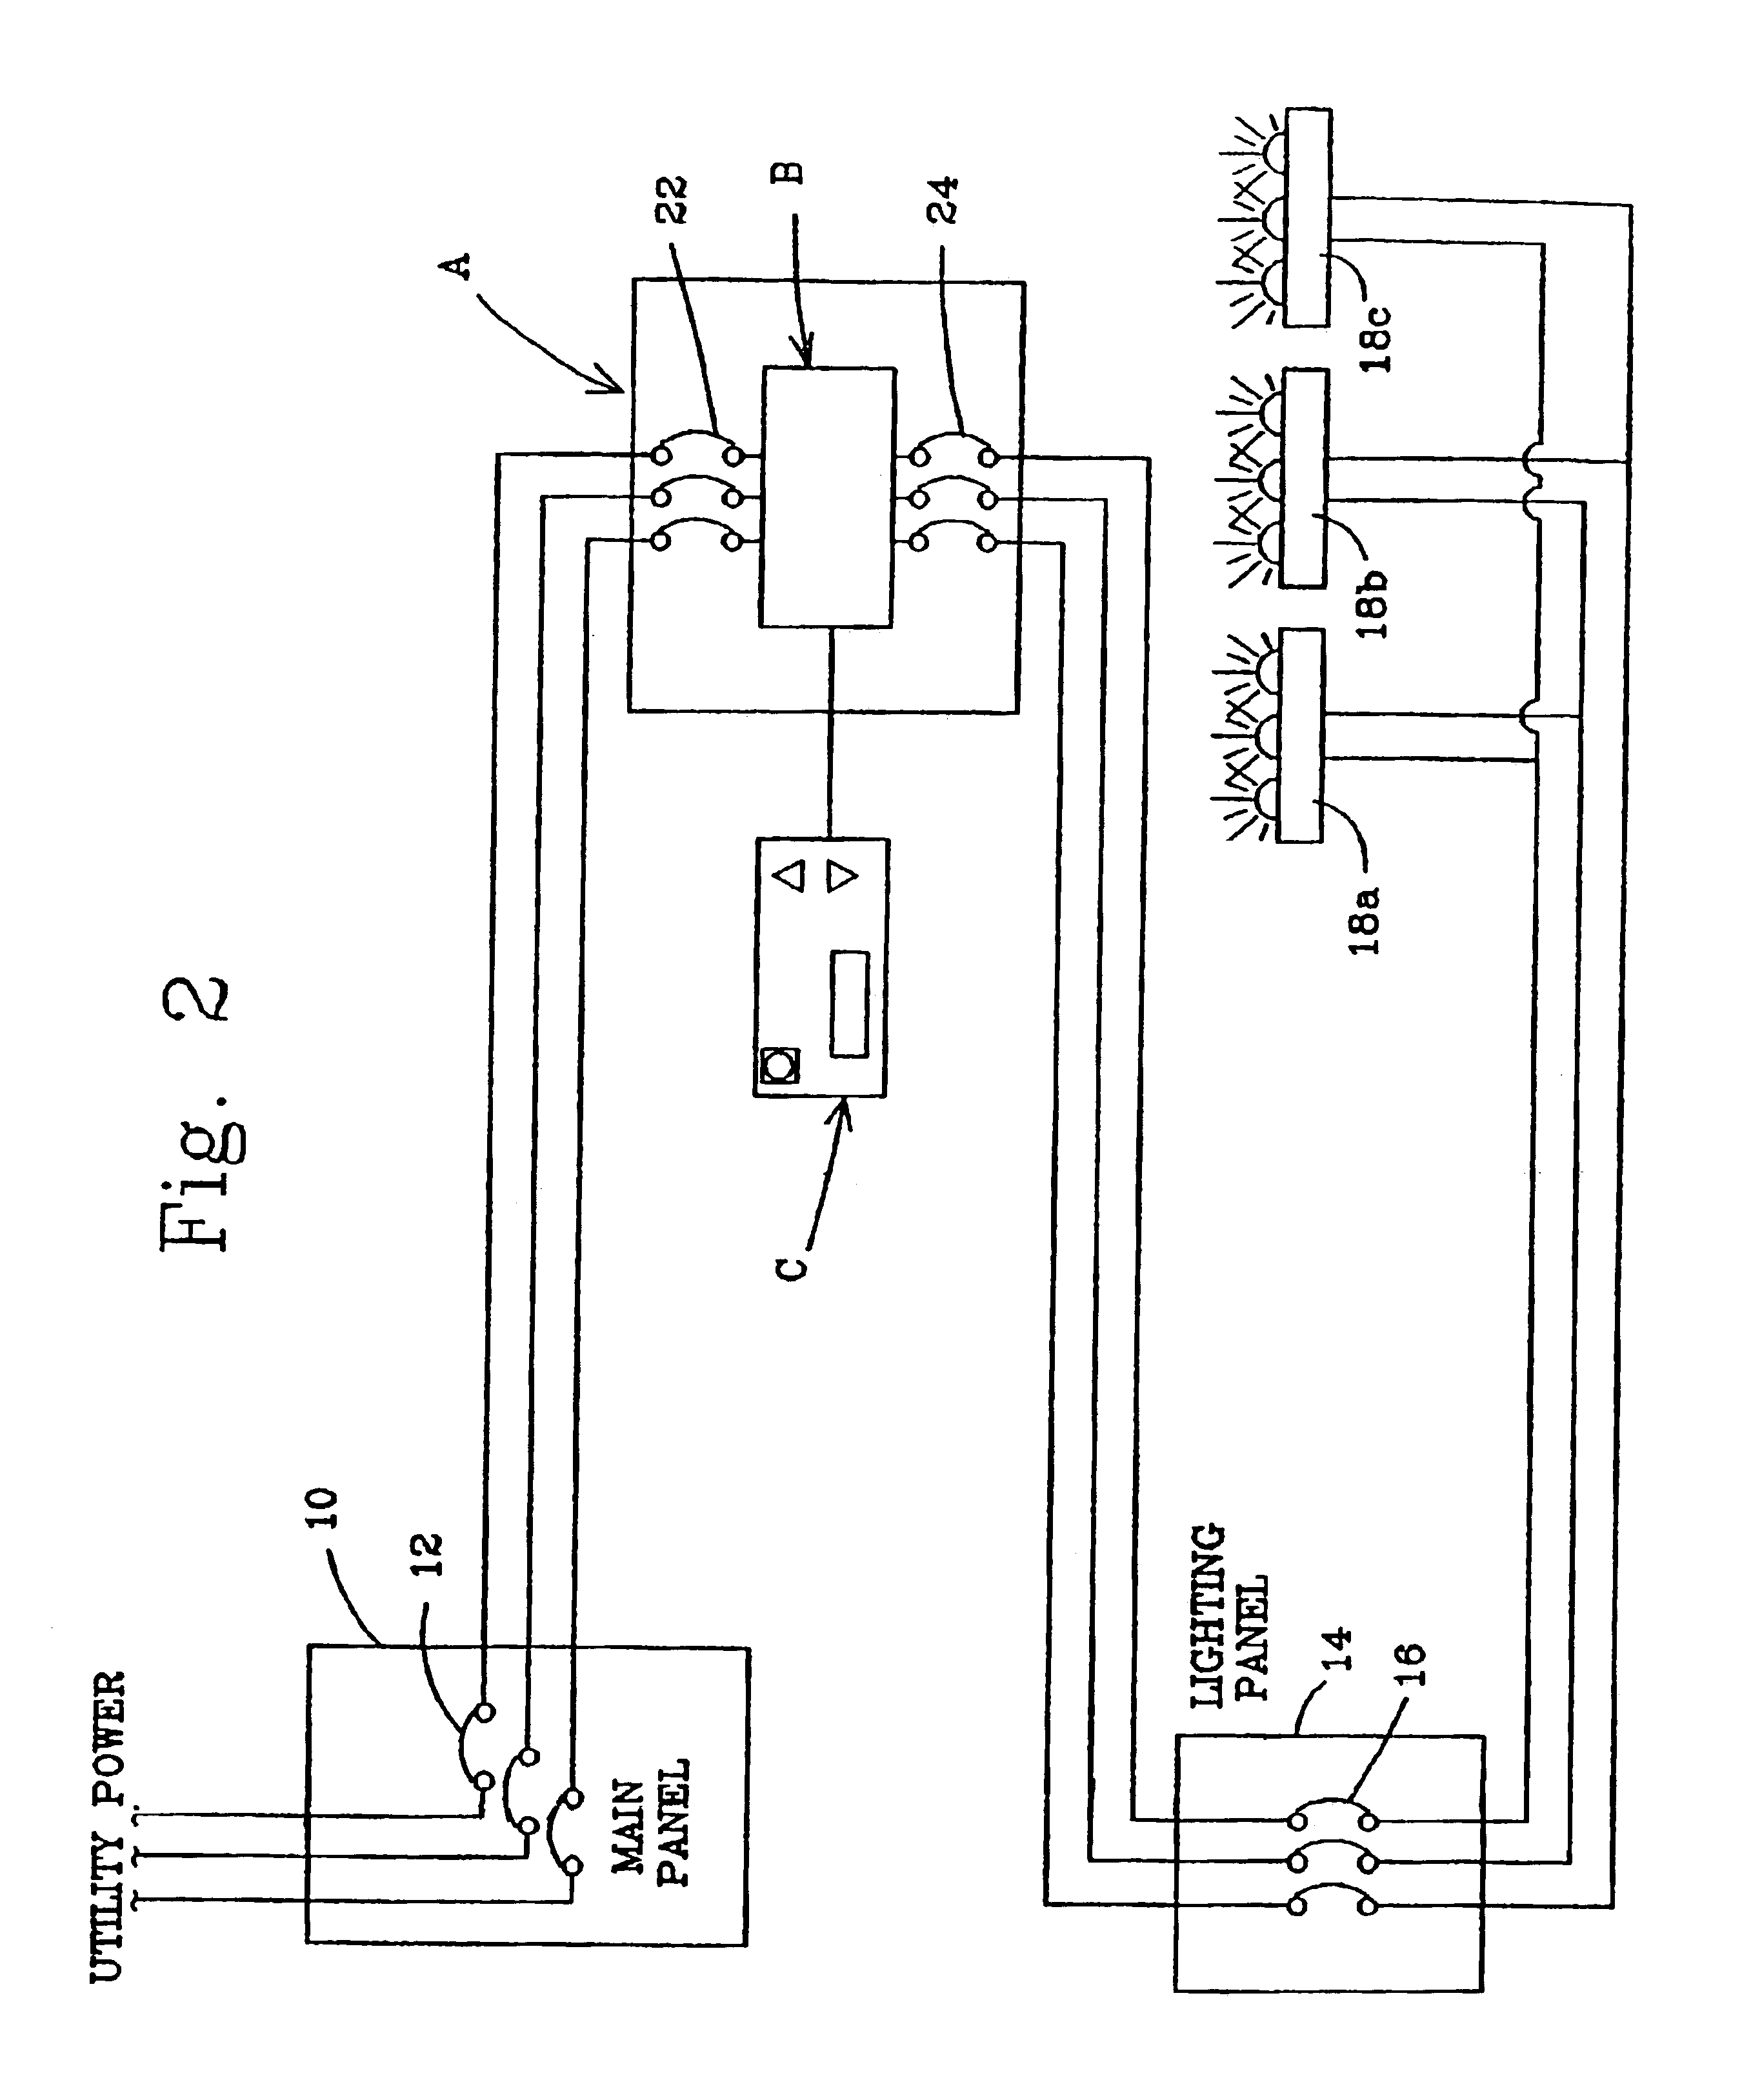 Power control system for reducing power to lighting systems